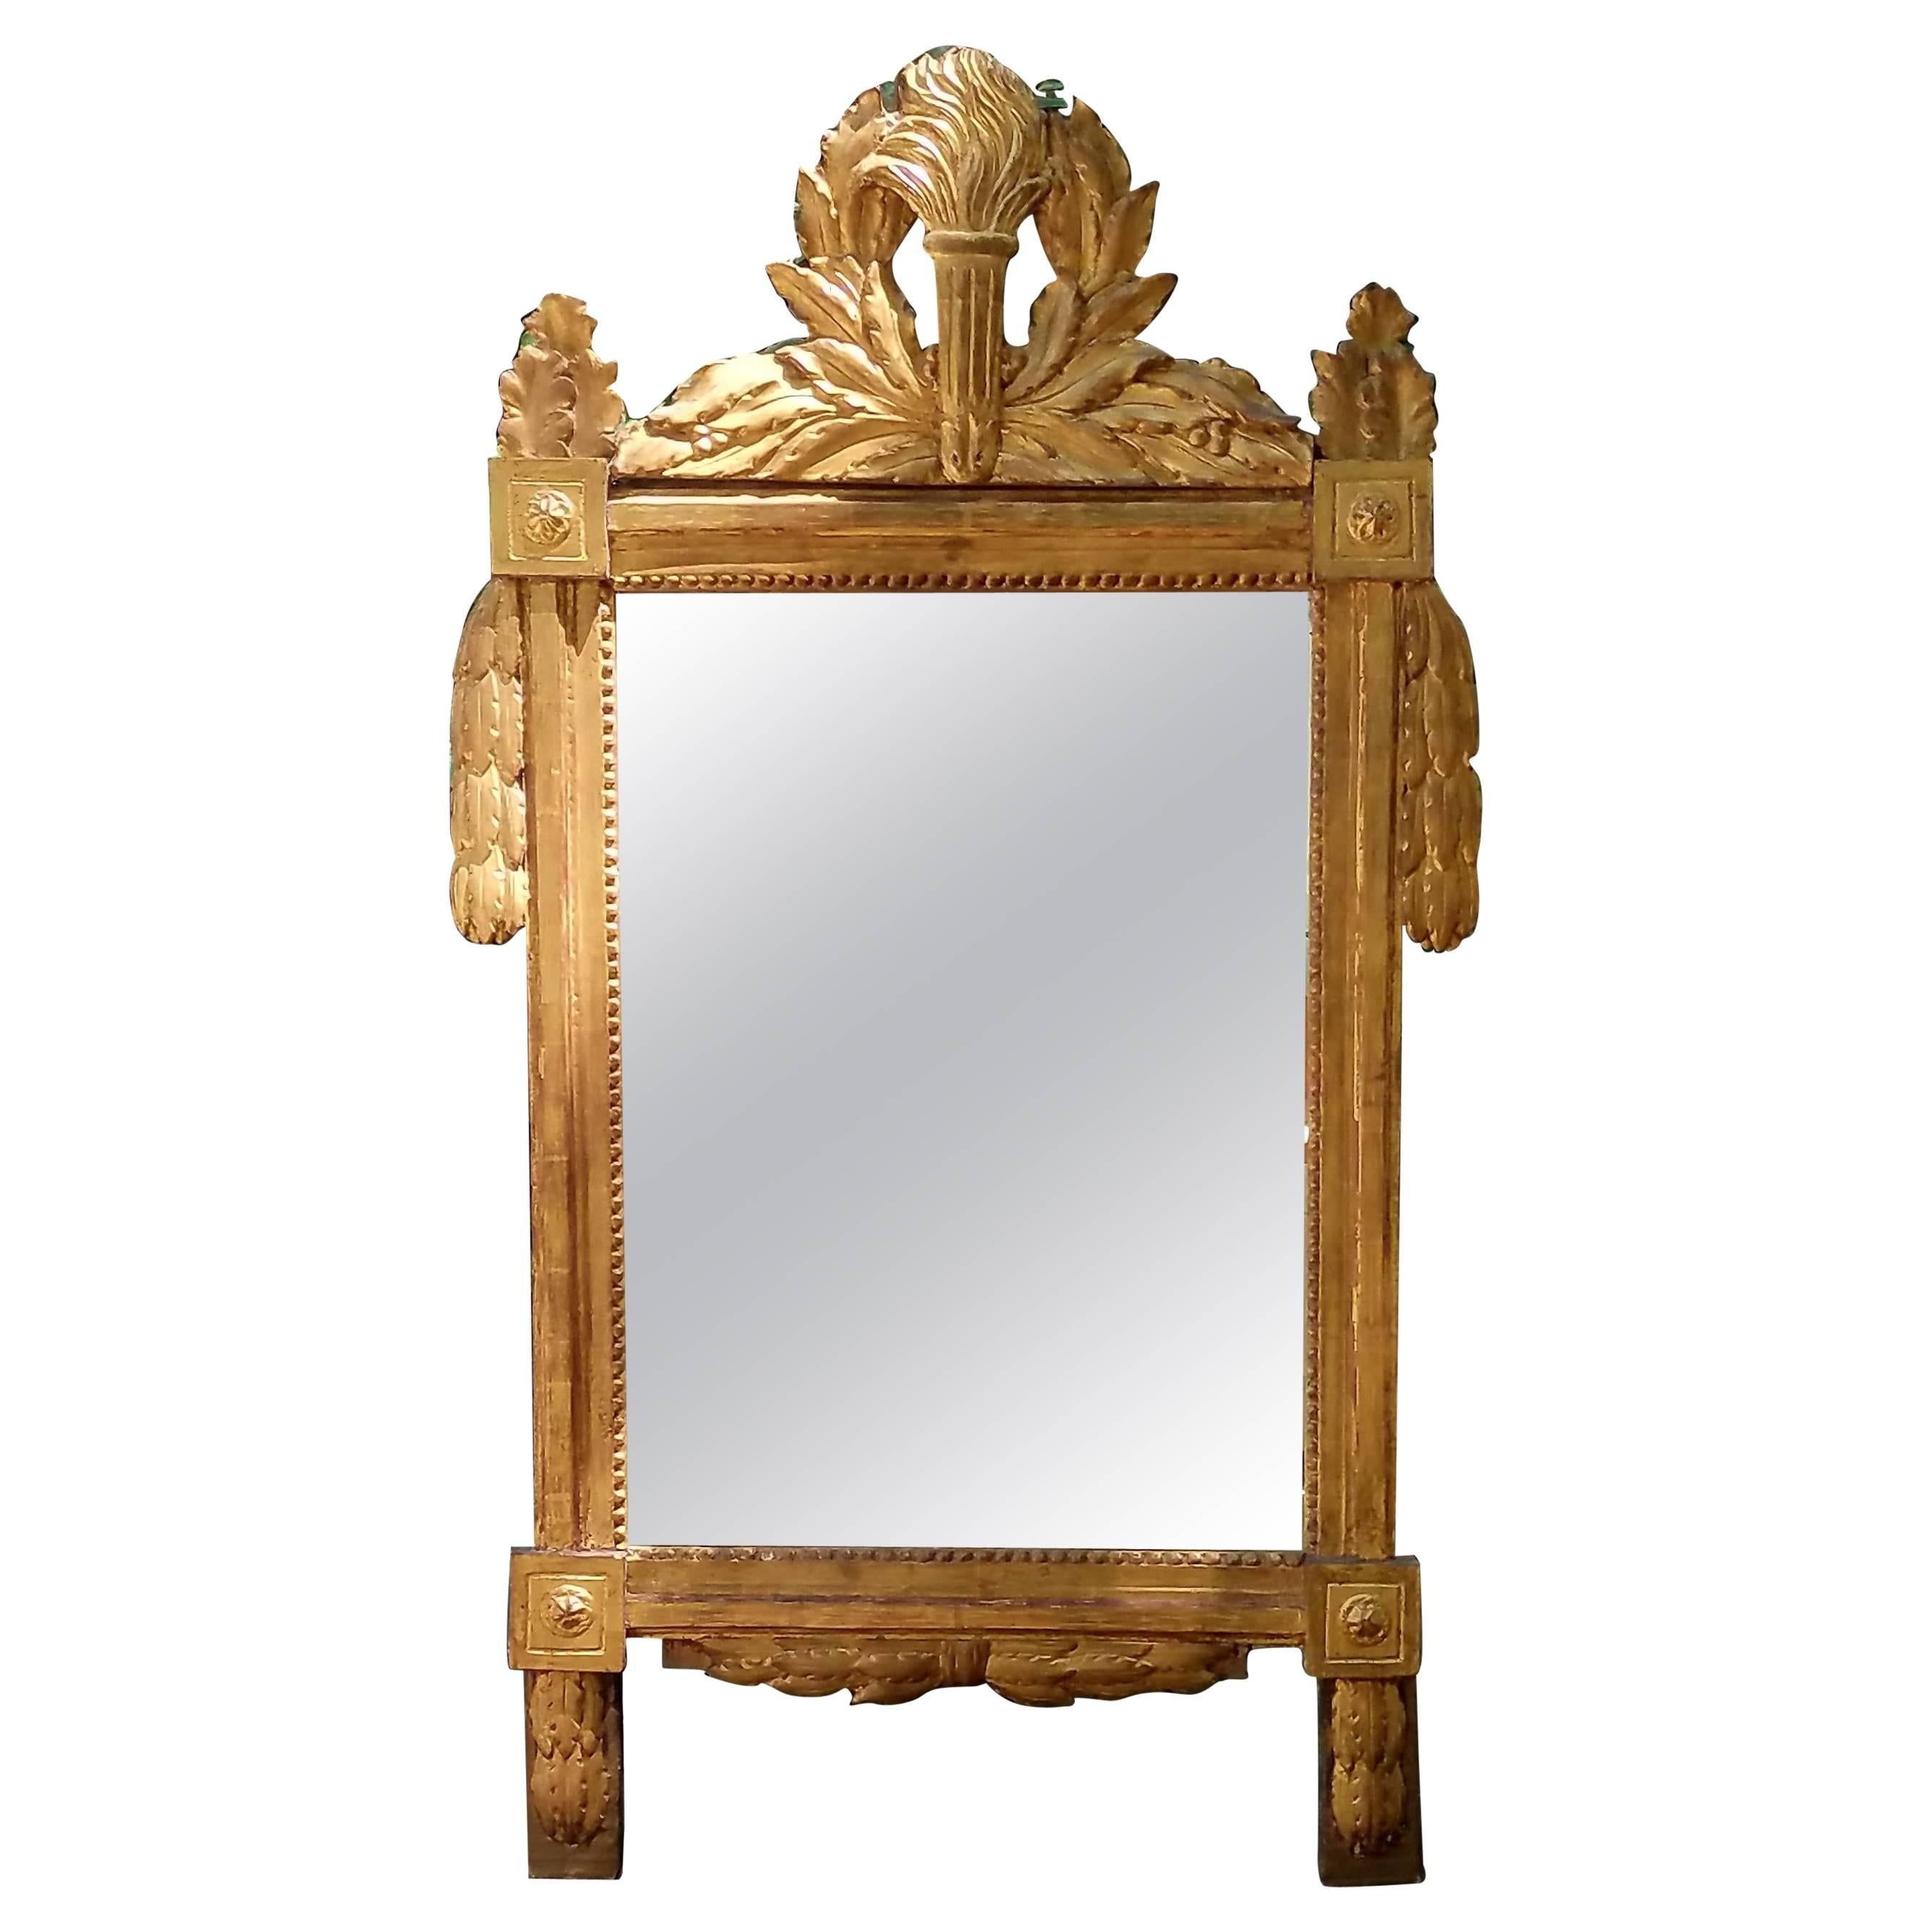 Beautiful 18th Century Carved French Gilt Mirror with Flaming Torch and Laurel For Sale